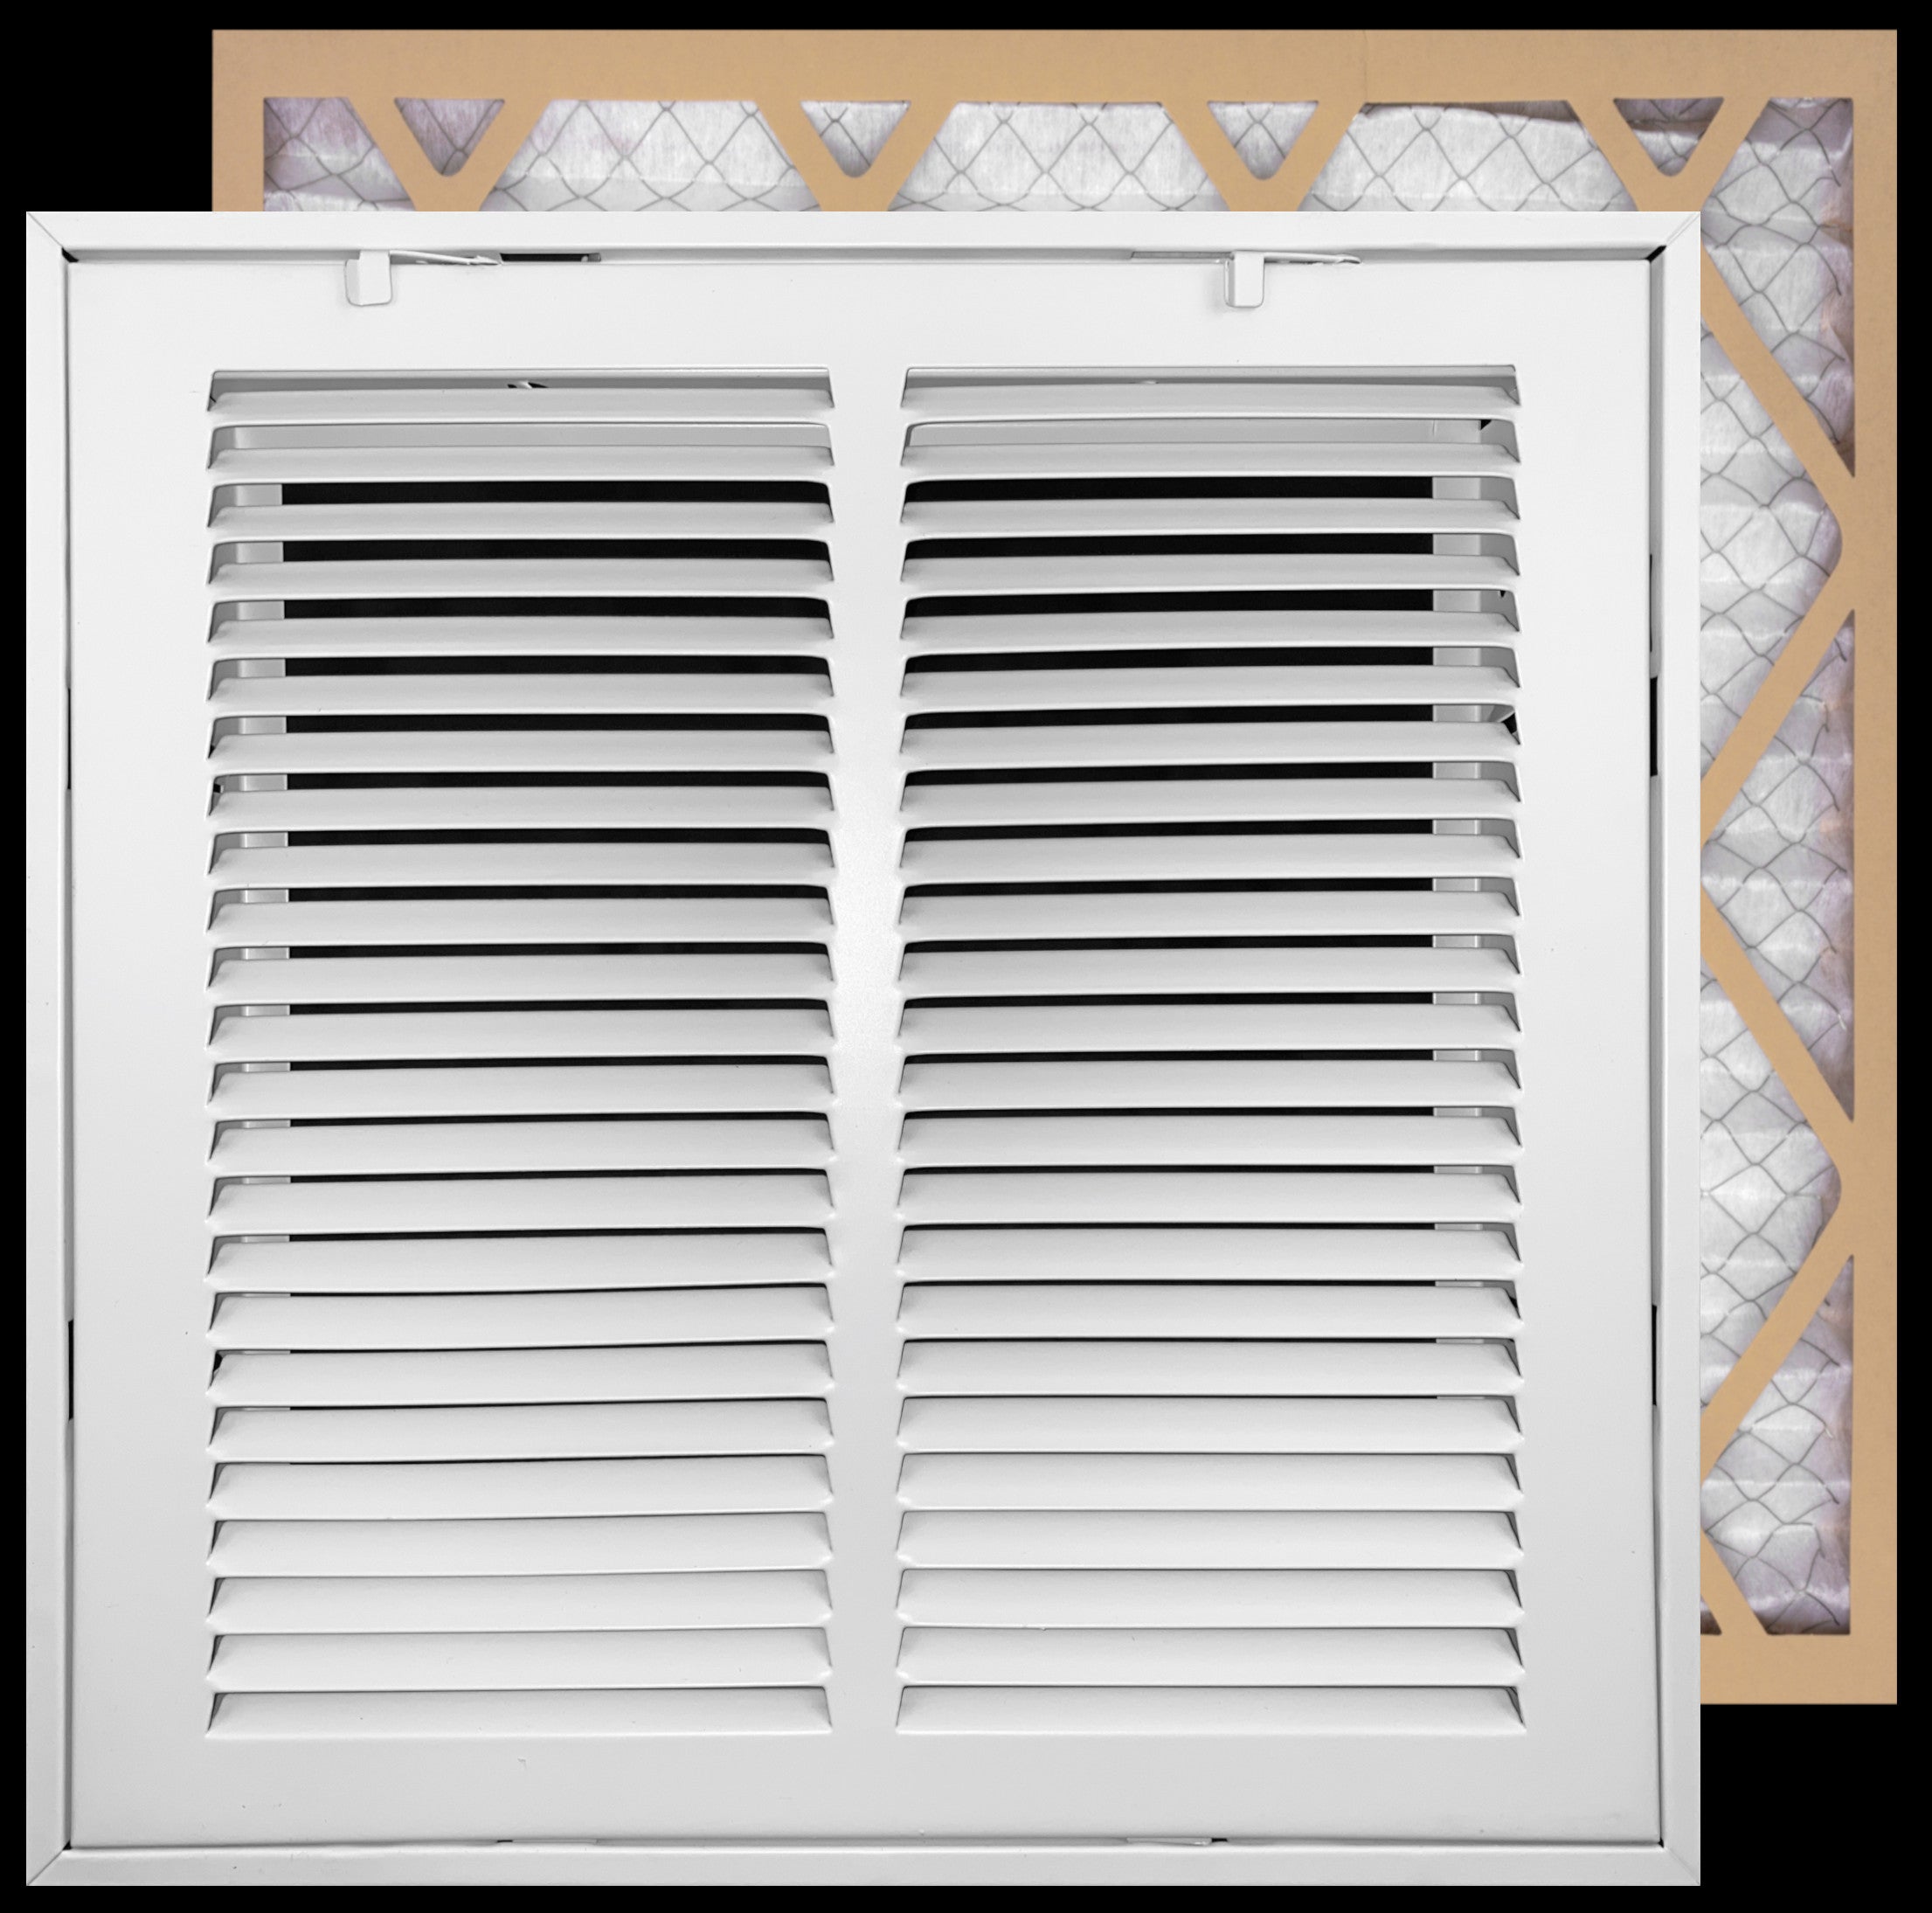 airgrilles 12" x 12" duct opening  -  filter included hd steel return air filter grille for sidewall and ceiling fil-7rafg1-wh-12x12 038775643849 - 1